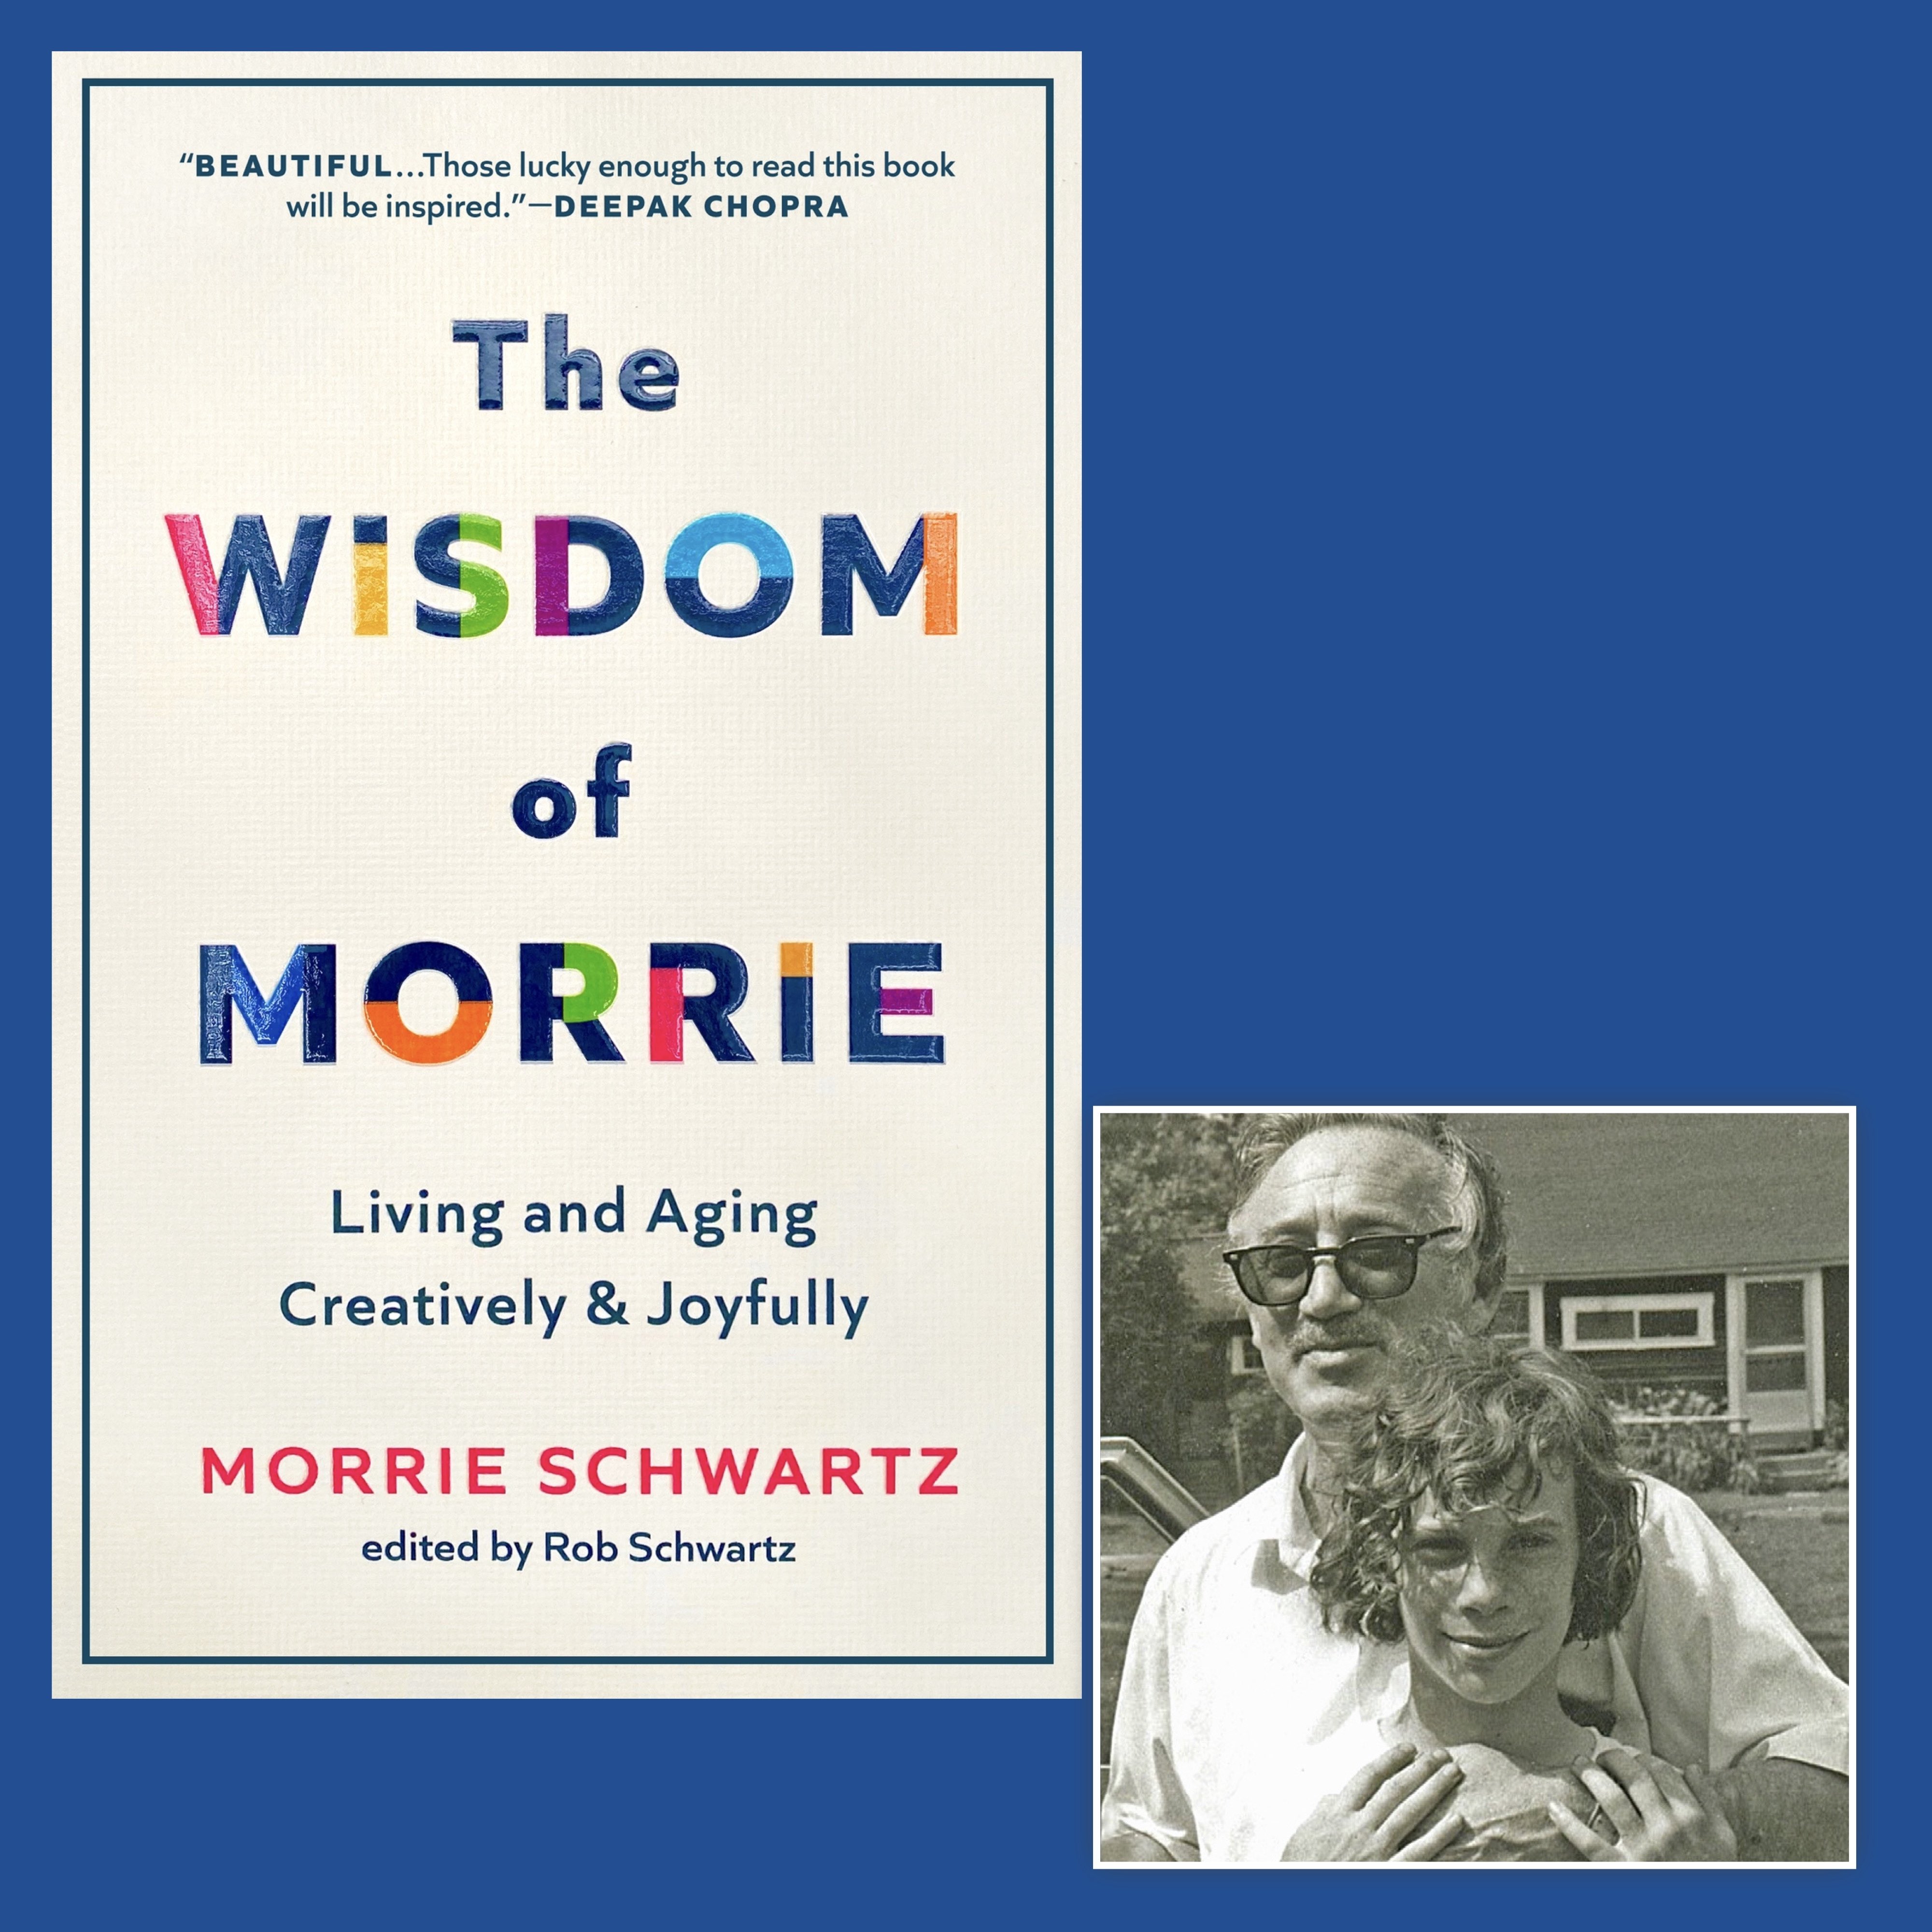 Join us for a Live Author Book Talk and Signing on Thurs July 20th at 6pm about "The Wisdom of Morrie" at Zibby's Bookshop Santa Monica with Son/Editor Rob Schwartz and LA Times Journalist P.K. Daniel